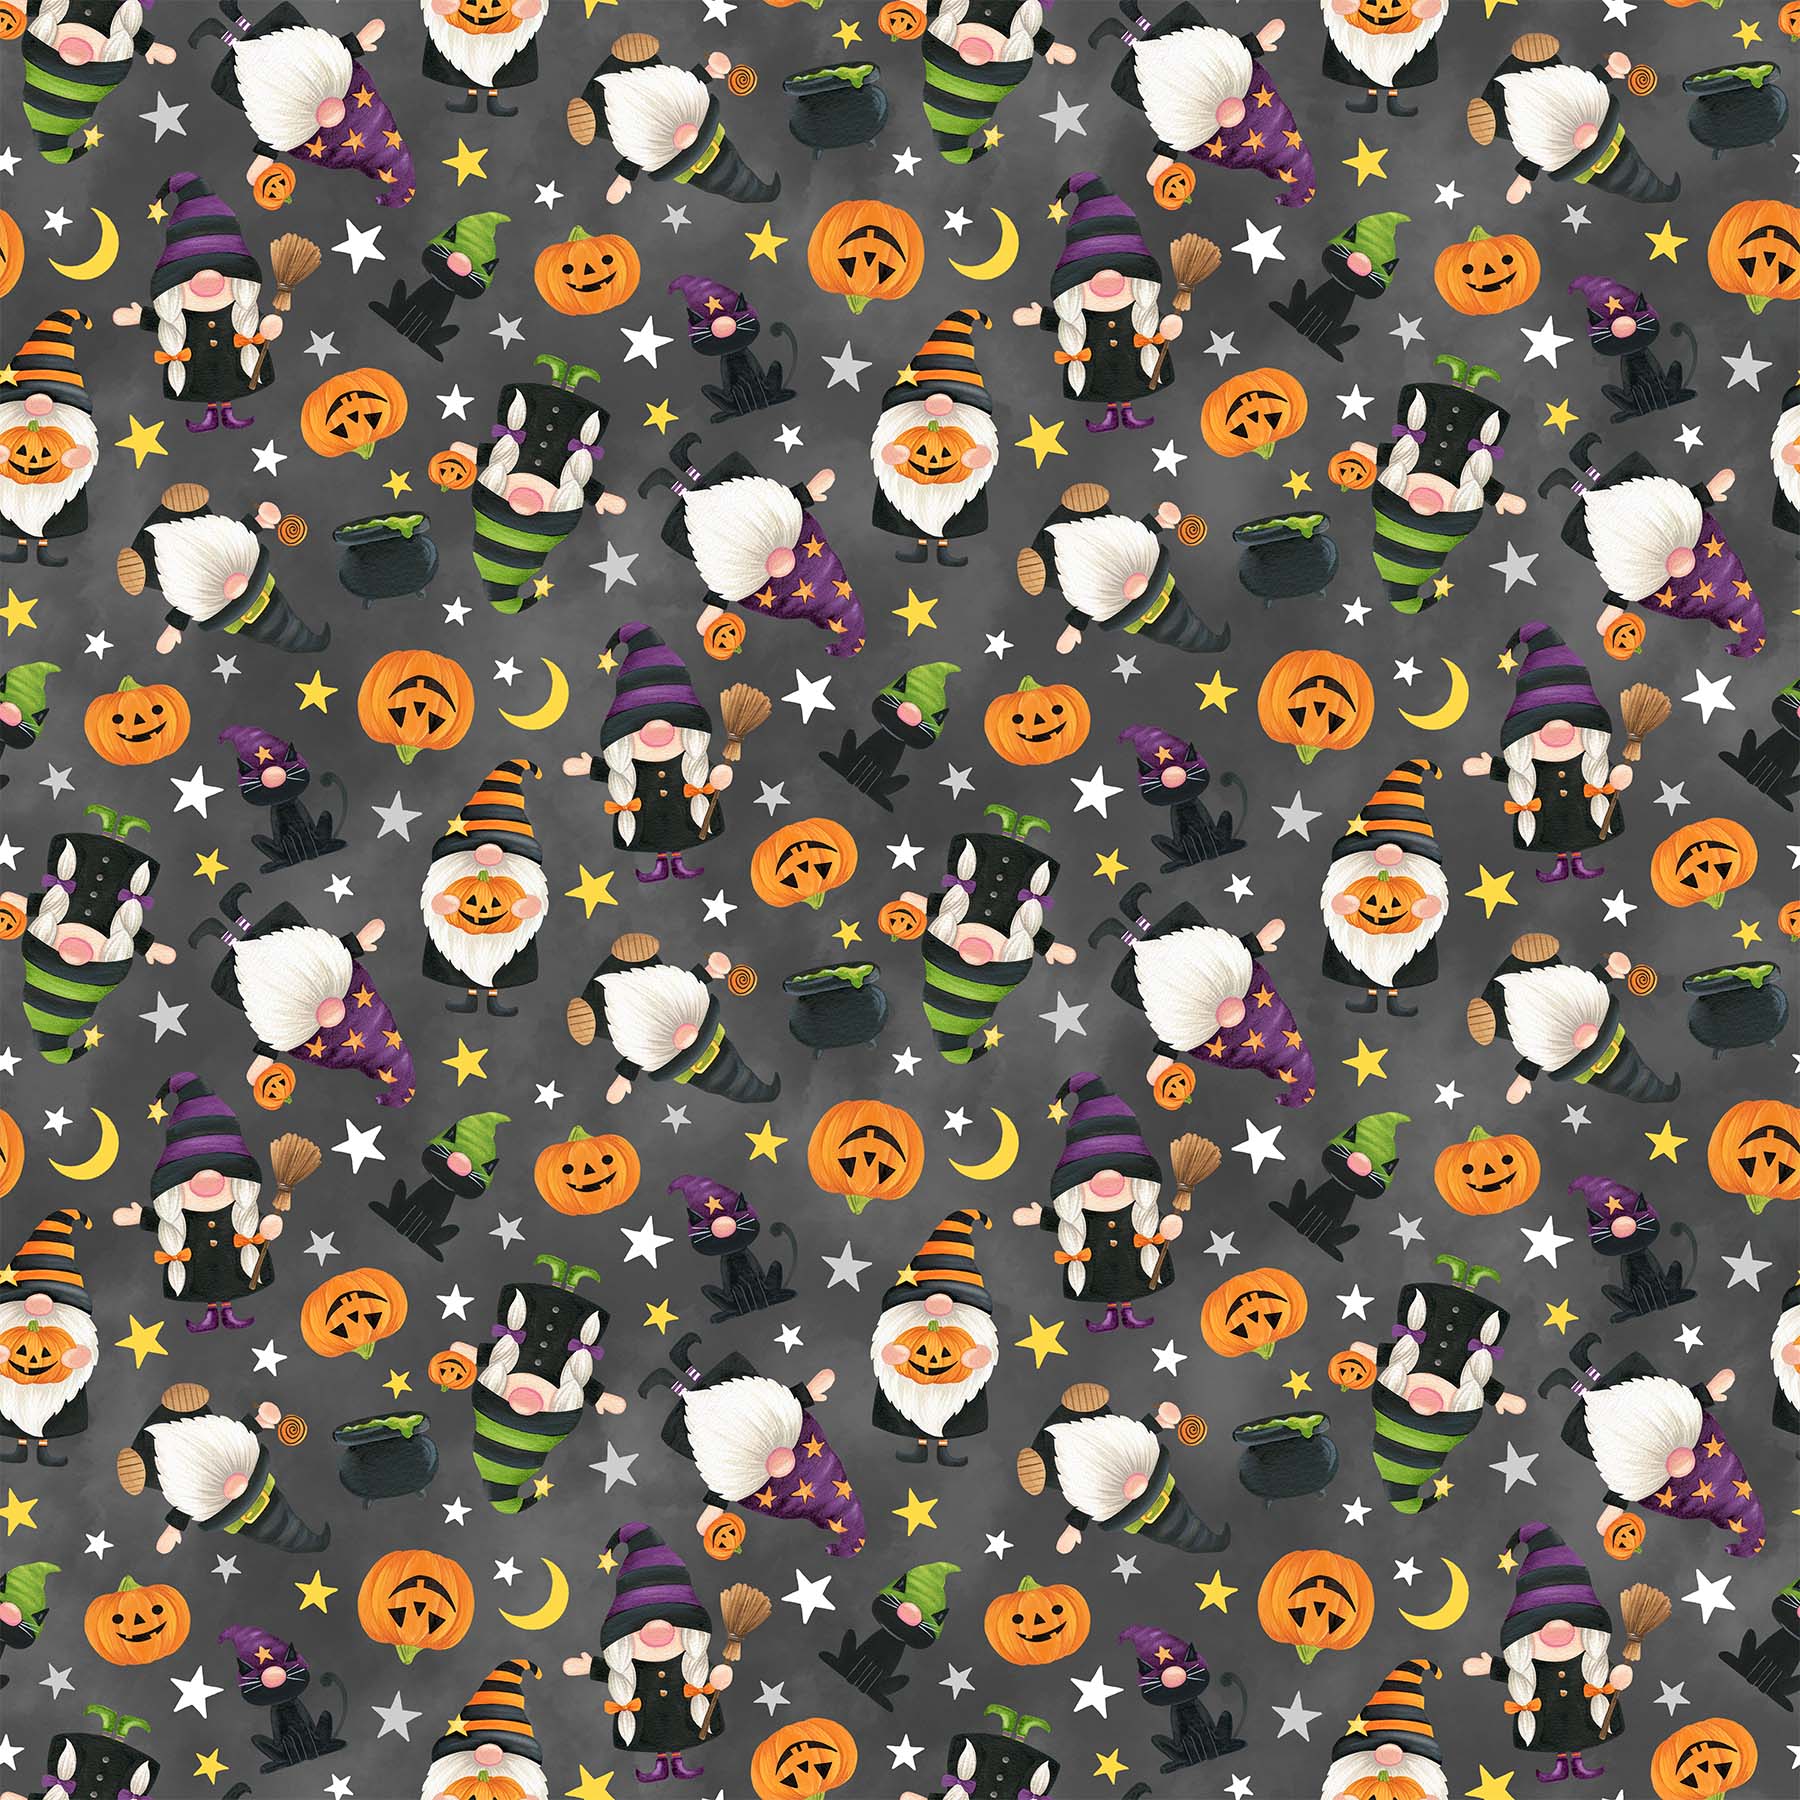 Gnomes Night Out 100% Cotton Fabric - 24662-95